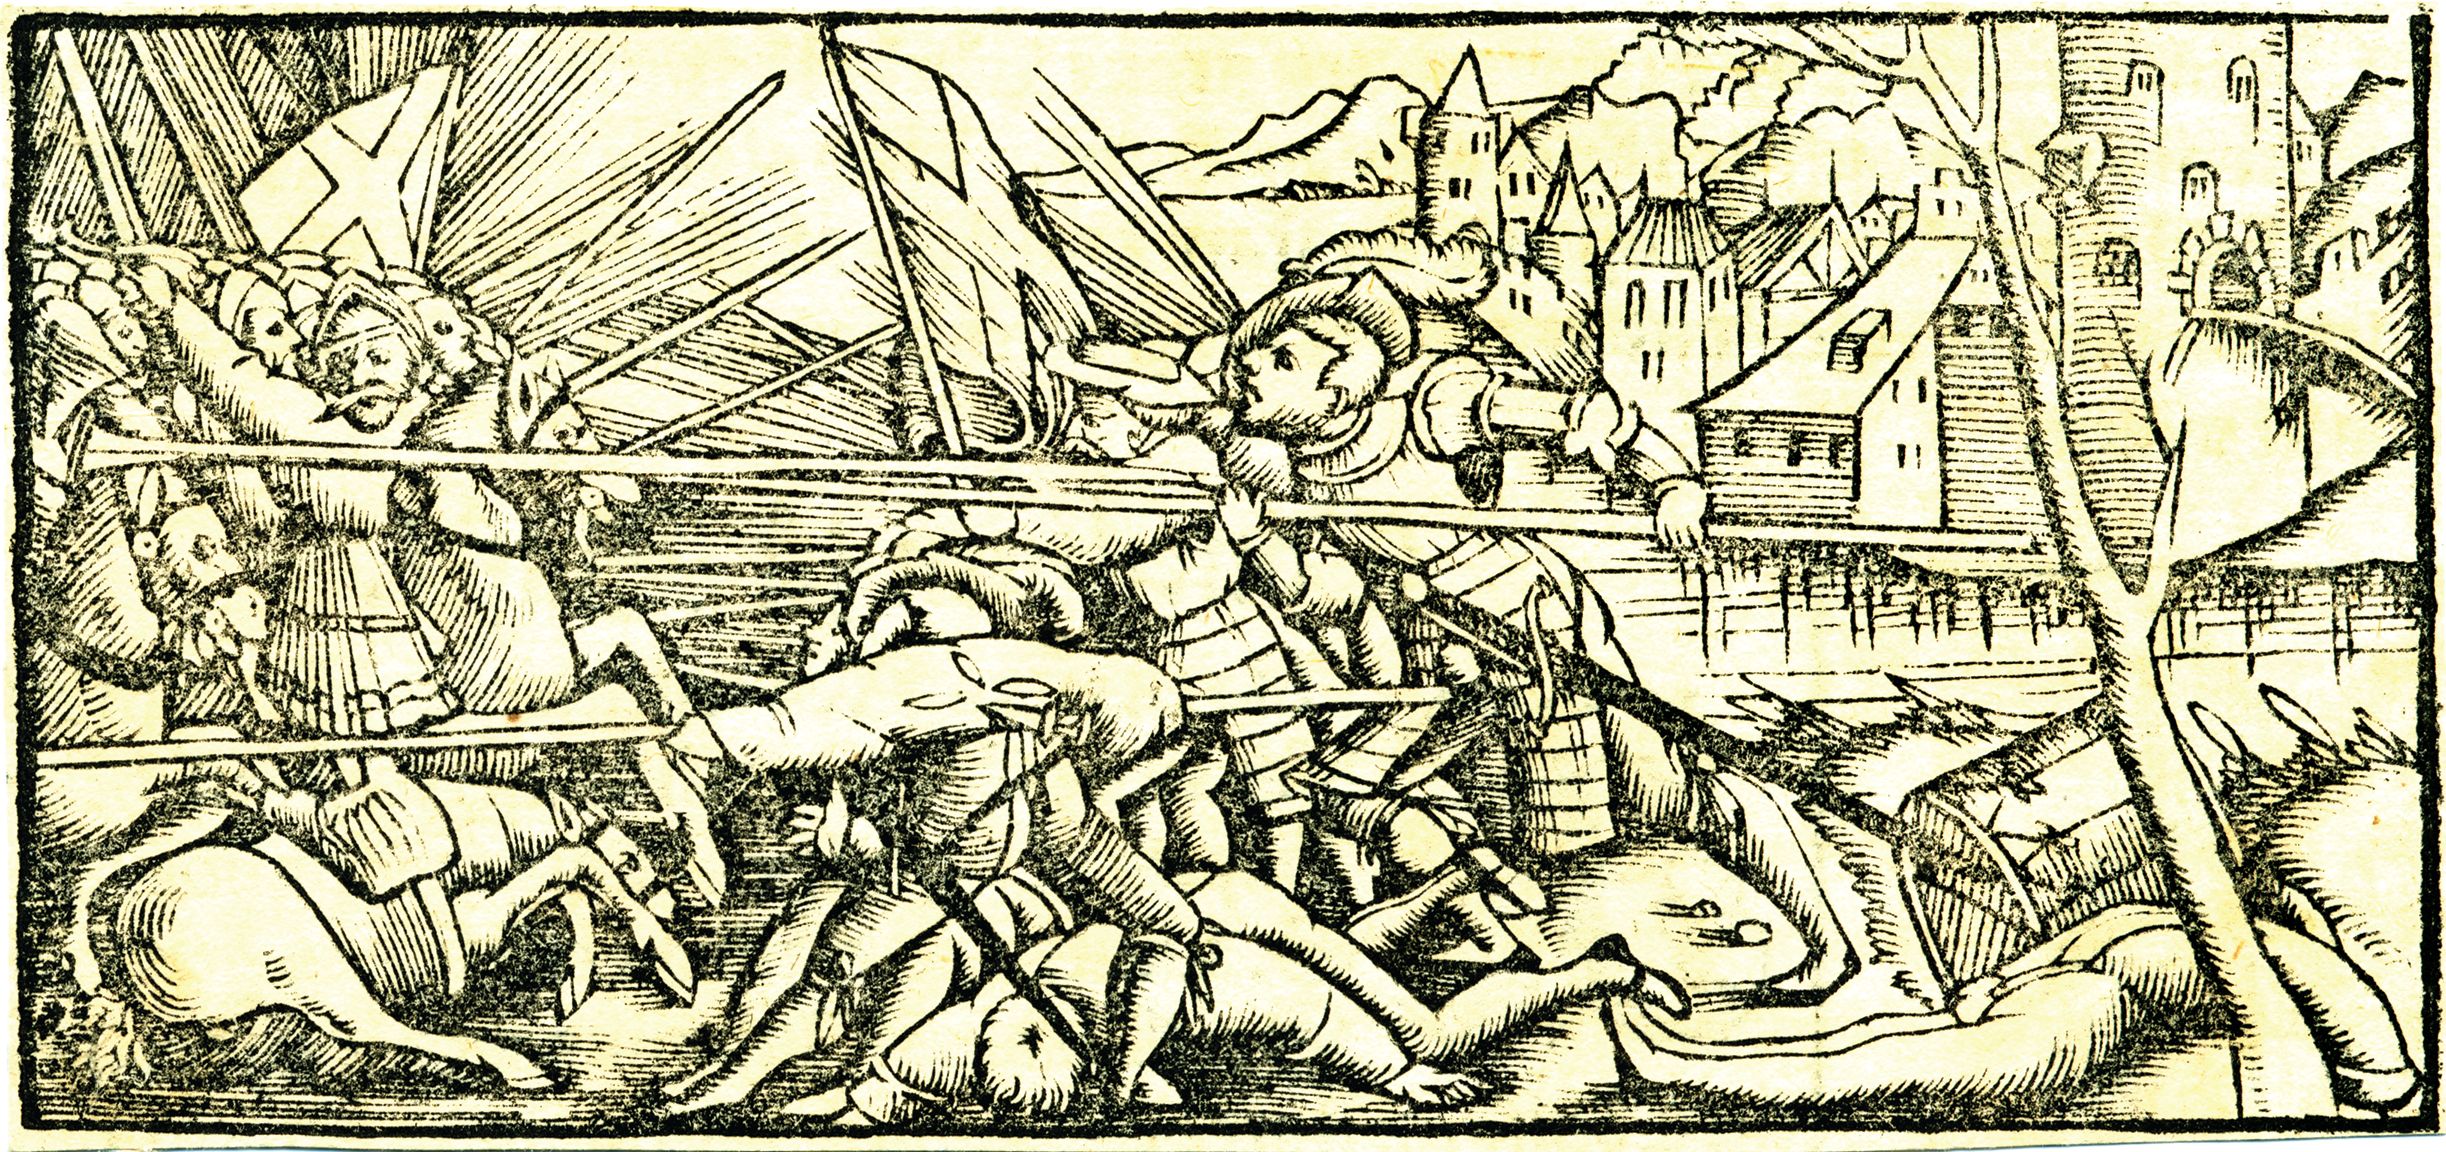 A period woodcut depicts Swiss pikemen stopping mounted cavalry during the Burgundian wars. 